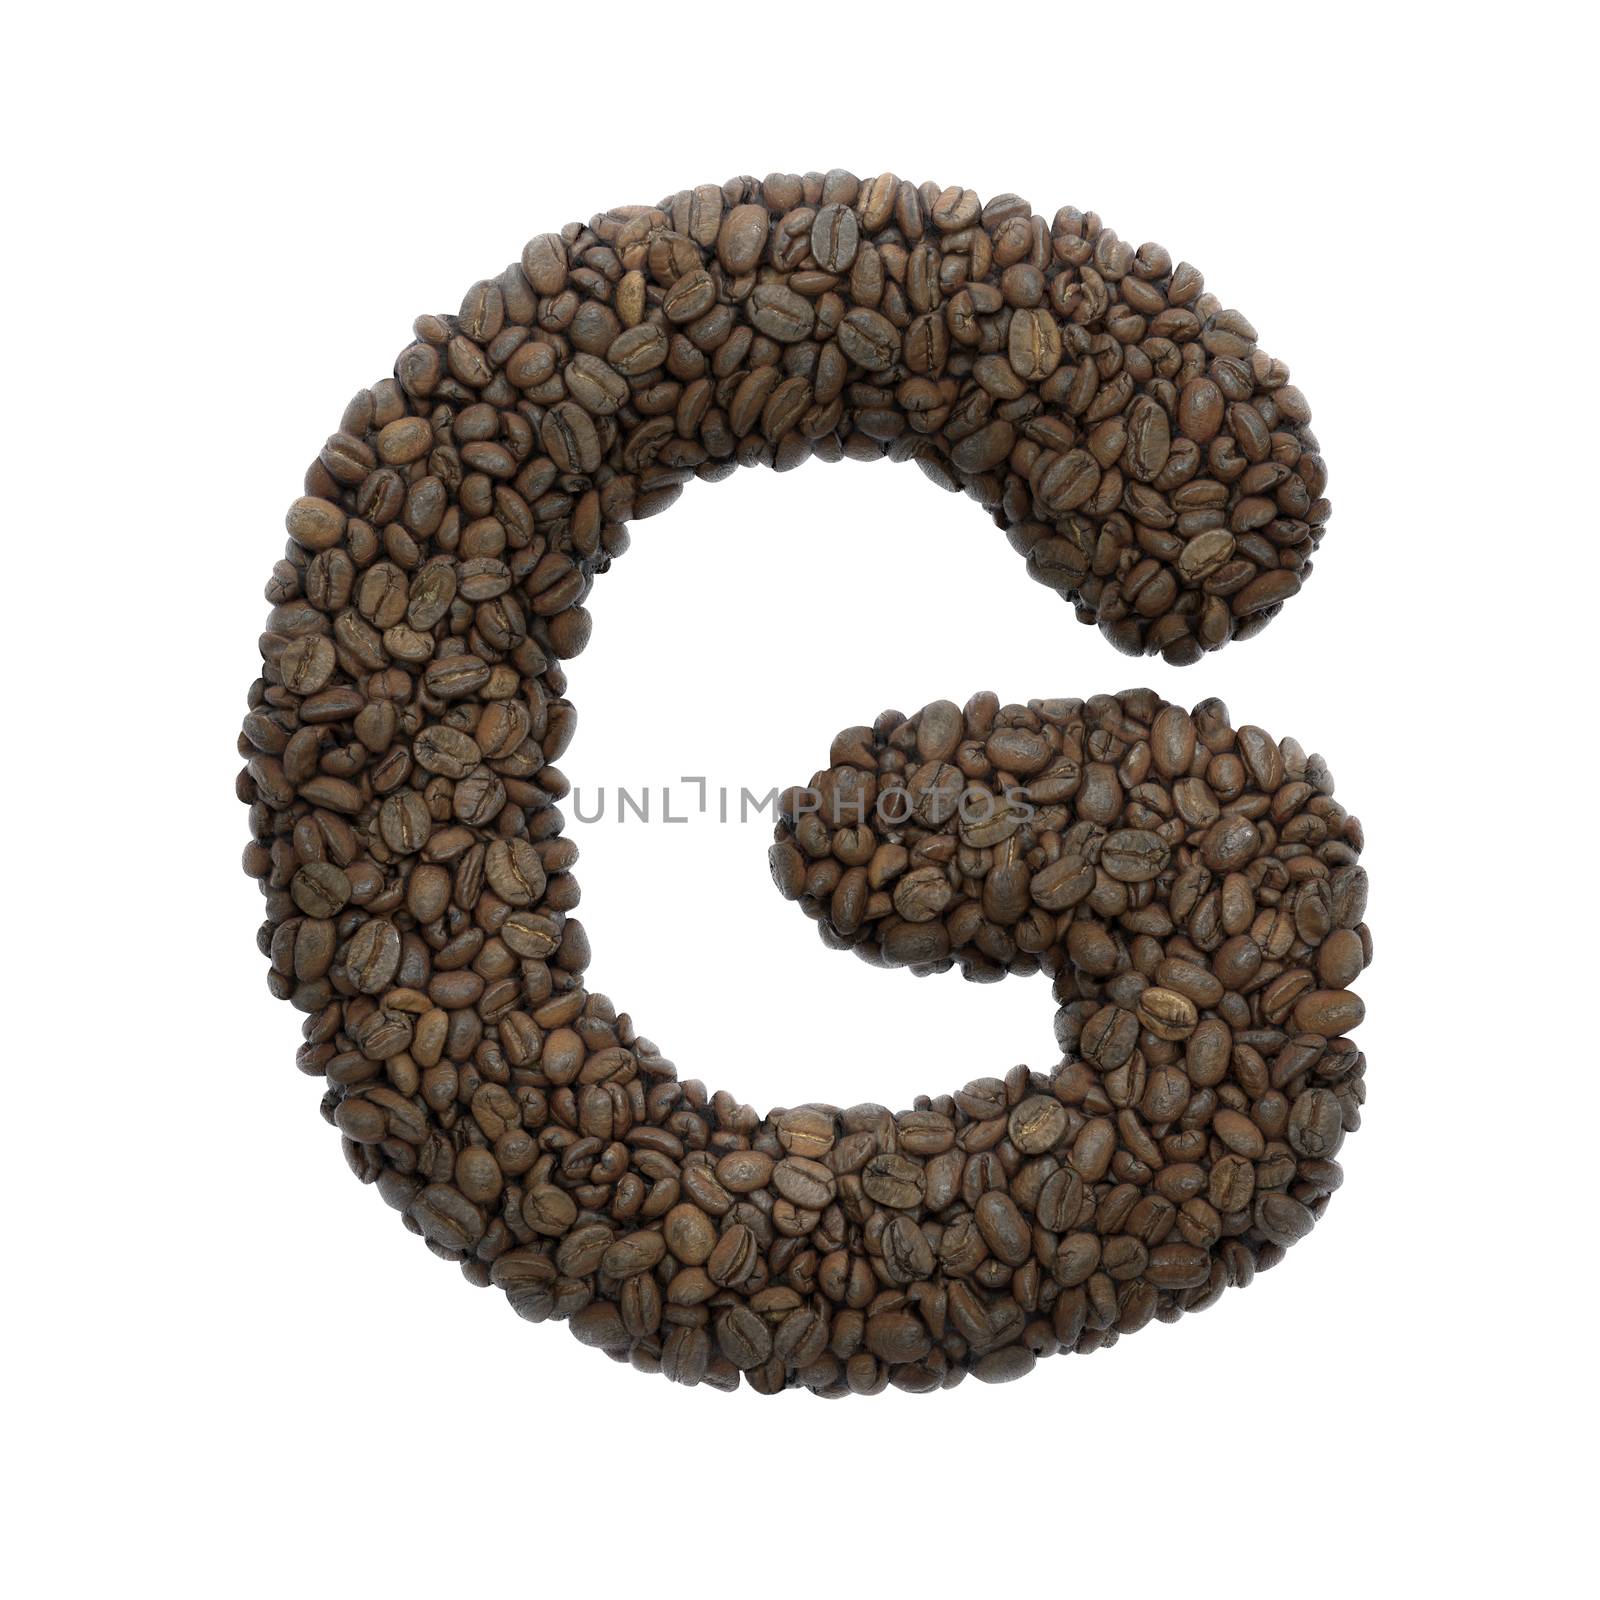 Coffee letter G - Capital 3d roasted beans font - suitable for Coffee, energy or insomnia related subjects by chrisroll